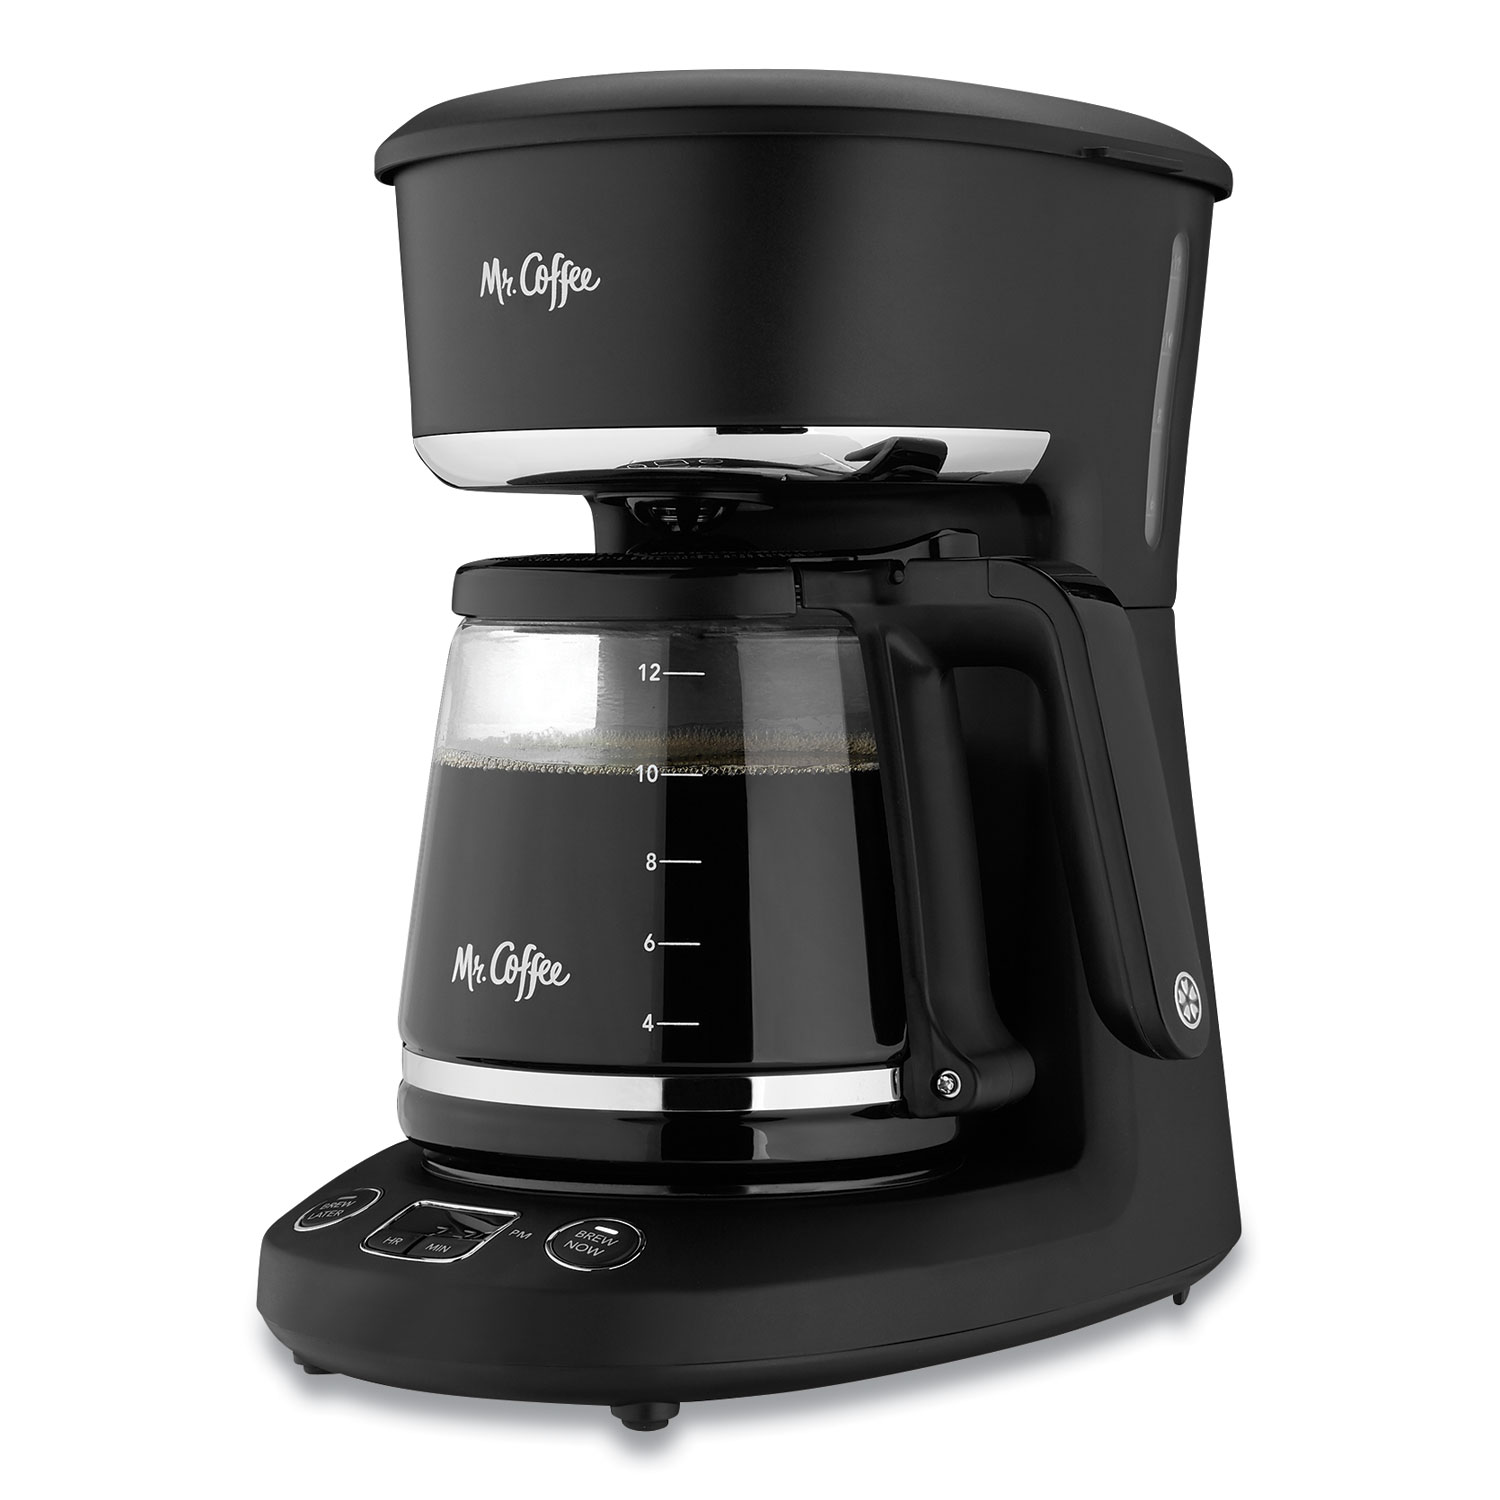  Mr. Coffee 2129432/2087908 12-Cup Programmable Automatic Coffee Maker, Black/Chrome (MFE24435563) 